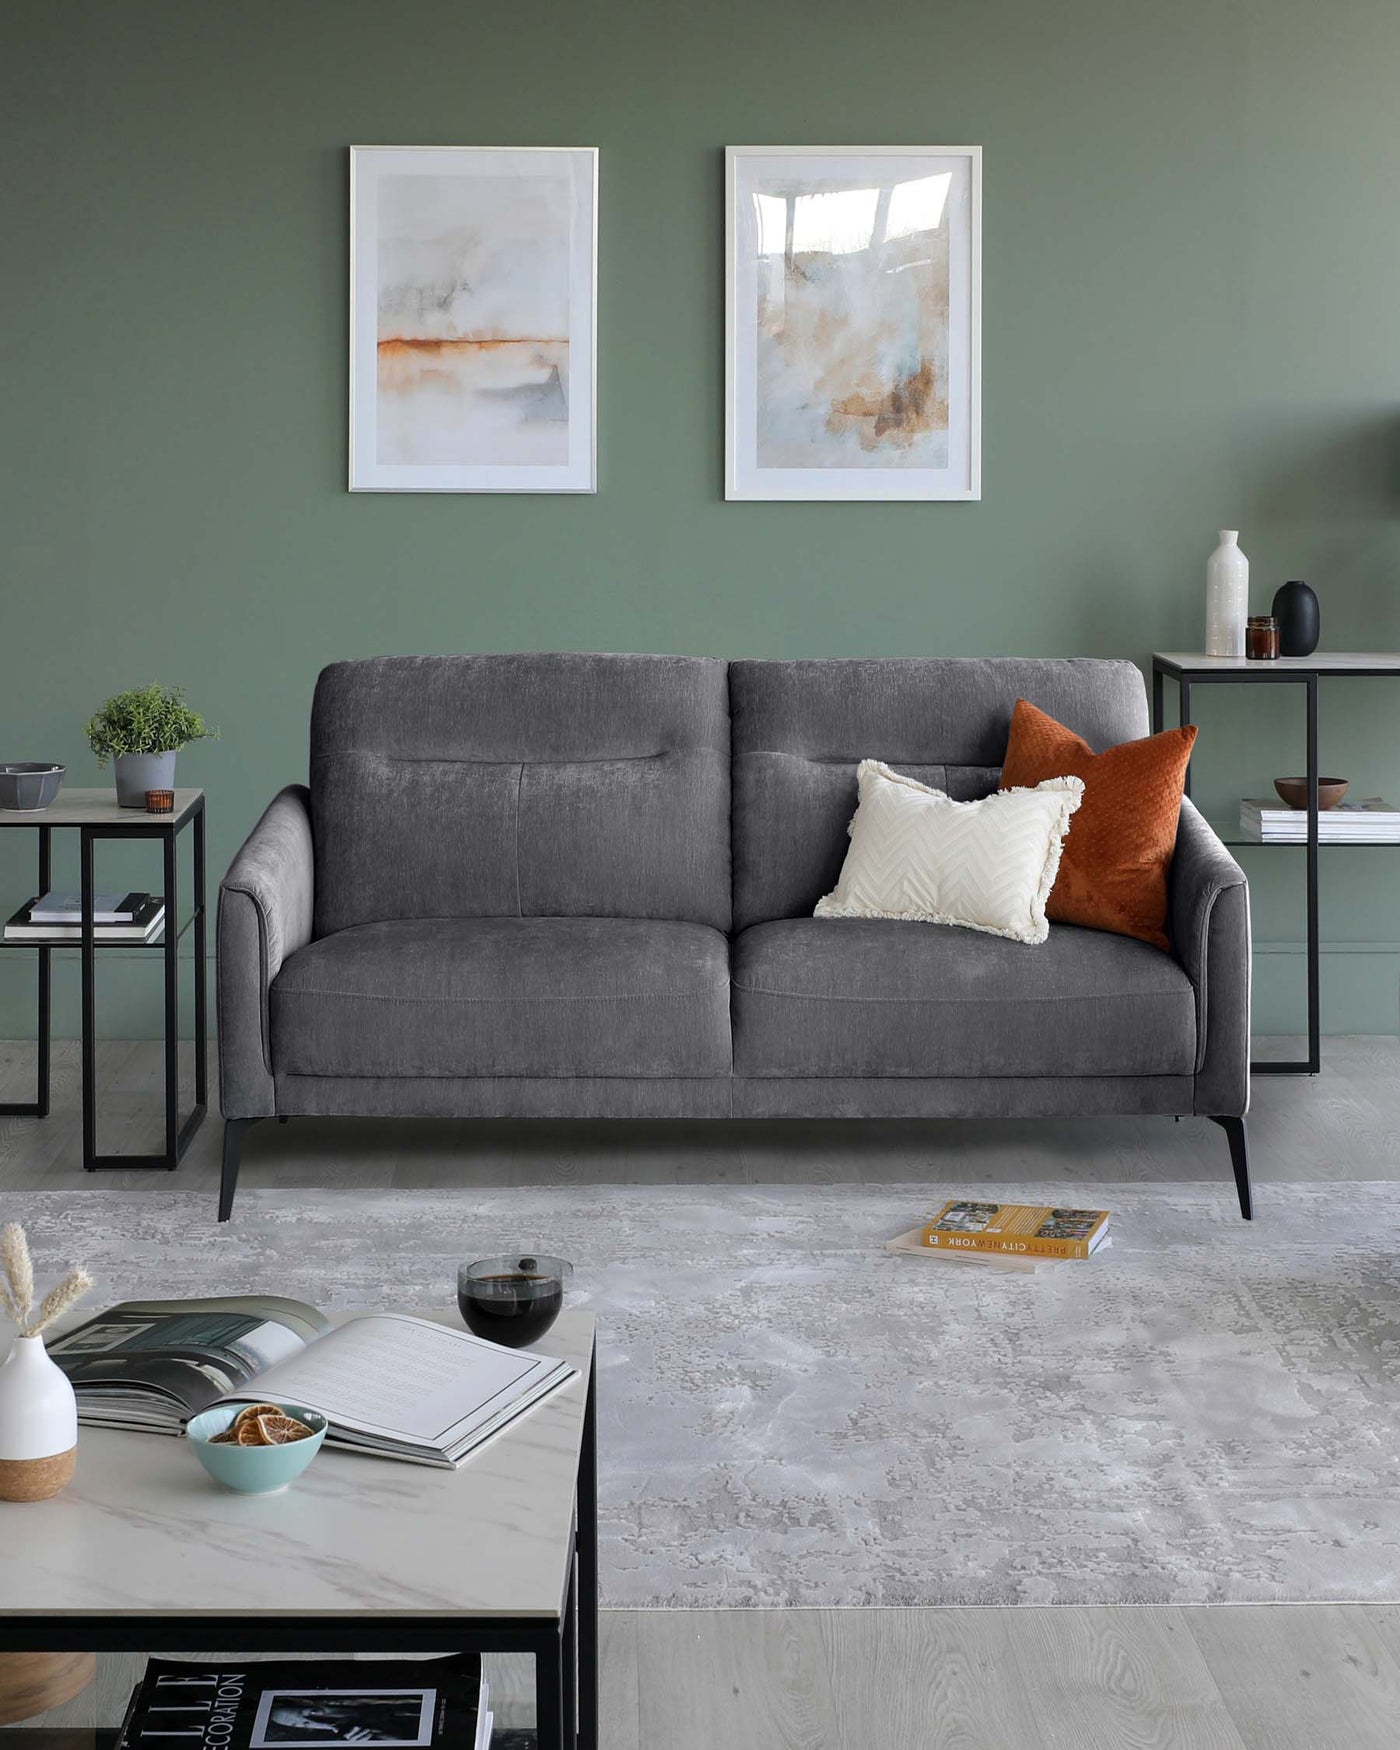 A modern living room featuring a charcoal grey fabric sofa with clean lines and slender black metal legs, complemented by a mix of geometric and textured throw pillows. In front of the sofa stands a sleek black metal side table with a square top, accessorized by a small potted plant, beside a matching minimalist rectangular coffee table displaying books and decorative items on both the top and lower shelf.